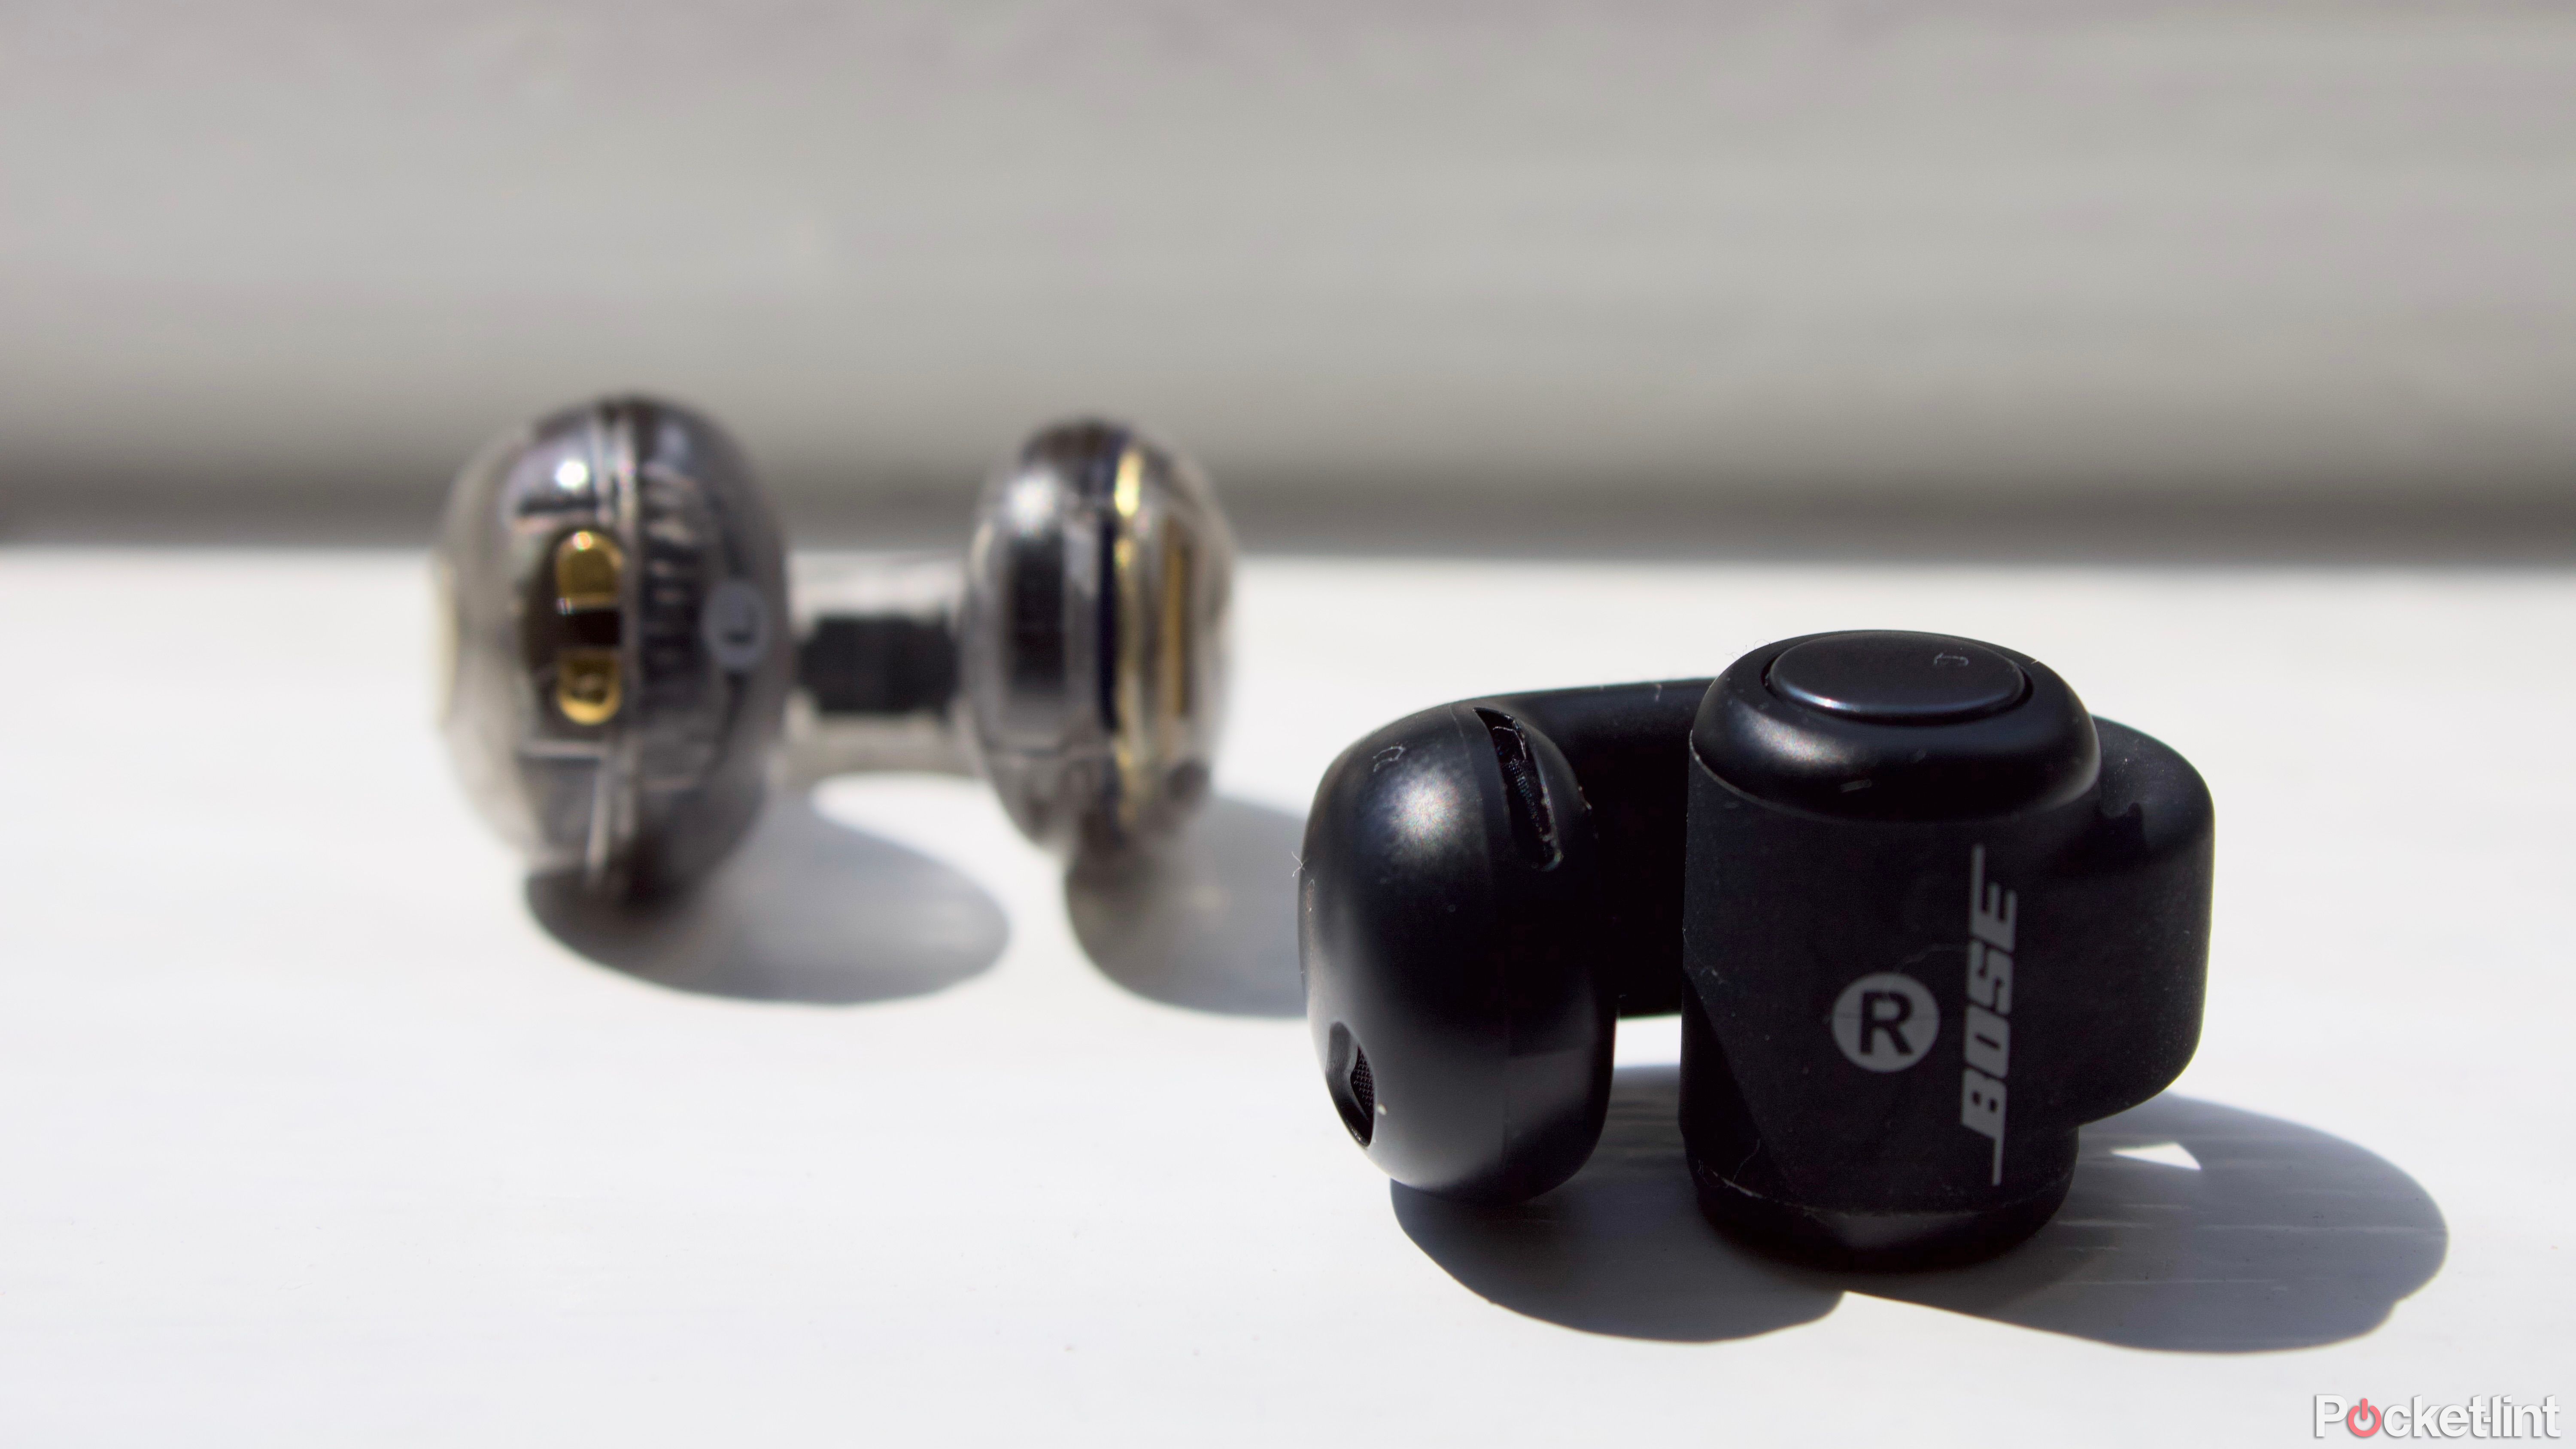 7 features to look for when buying wireless earbuds